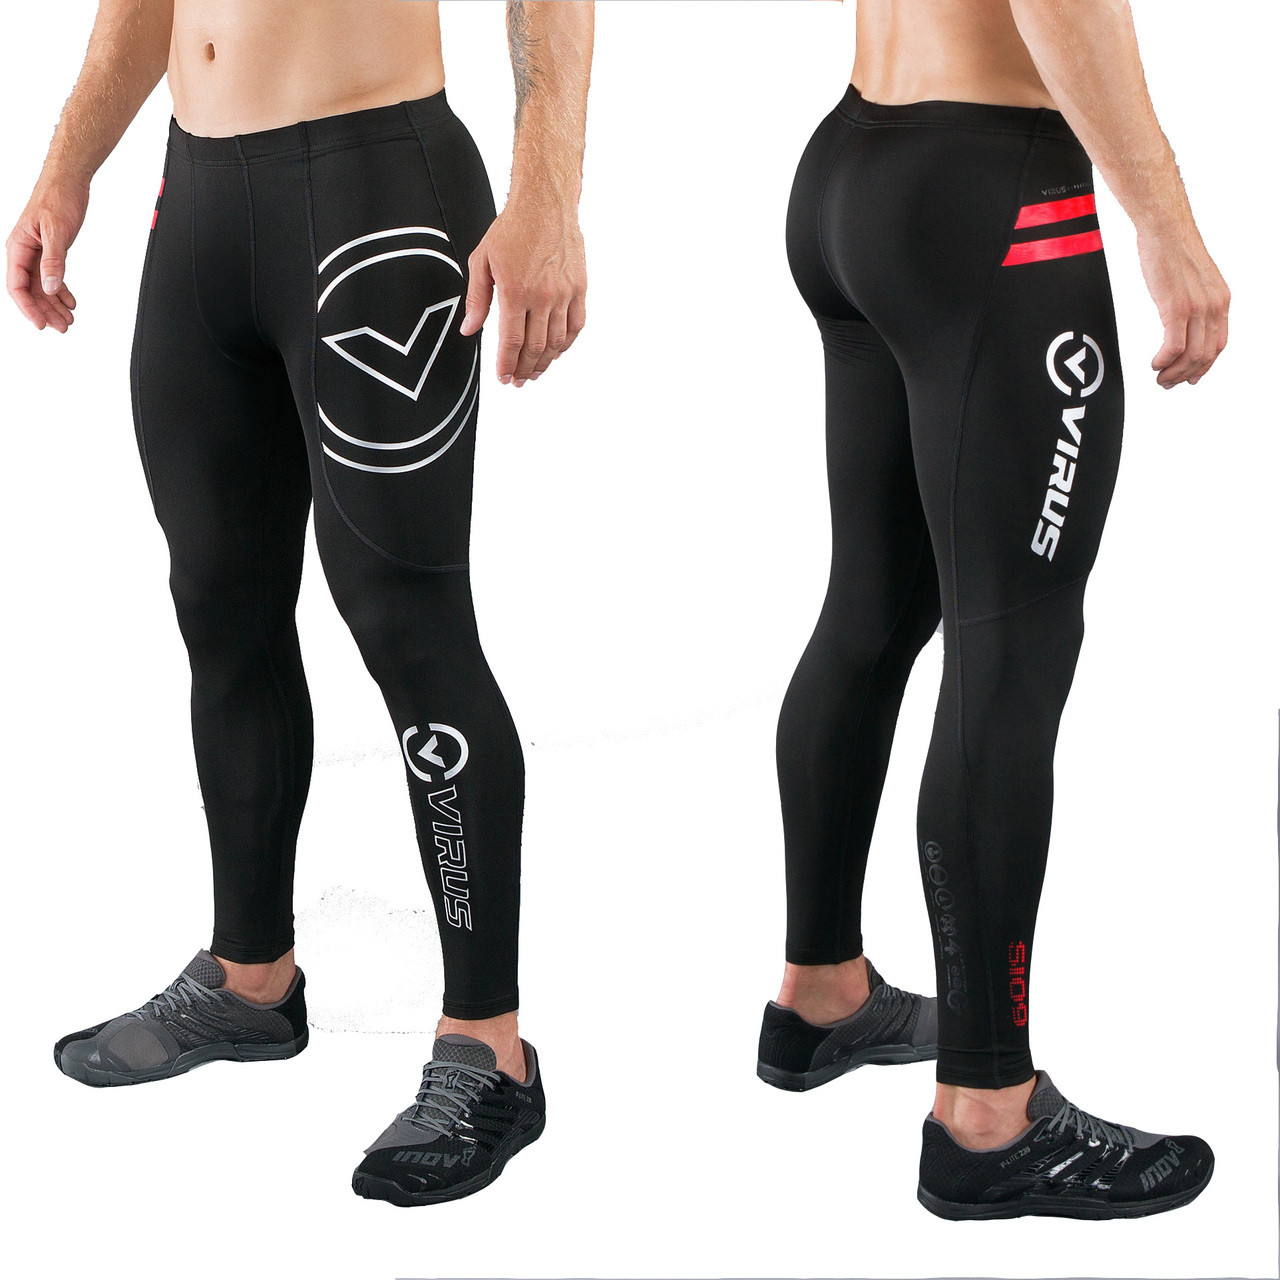 Virus Women's Stay Cool Eco33 Compression Pants BLACK